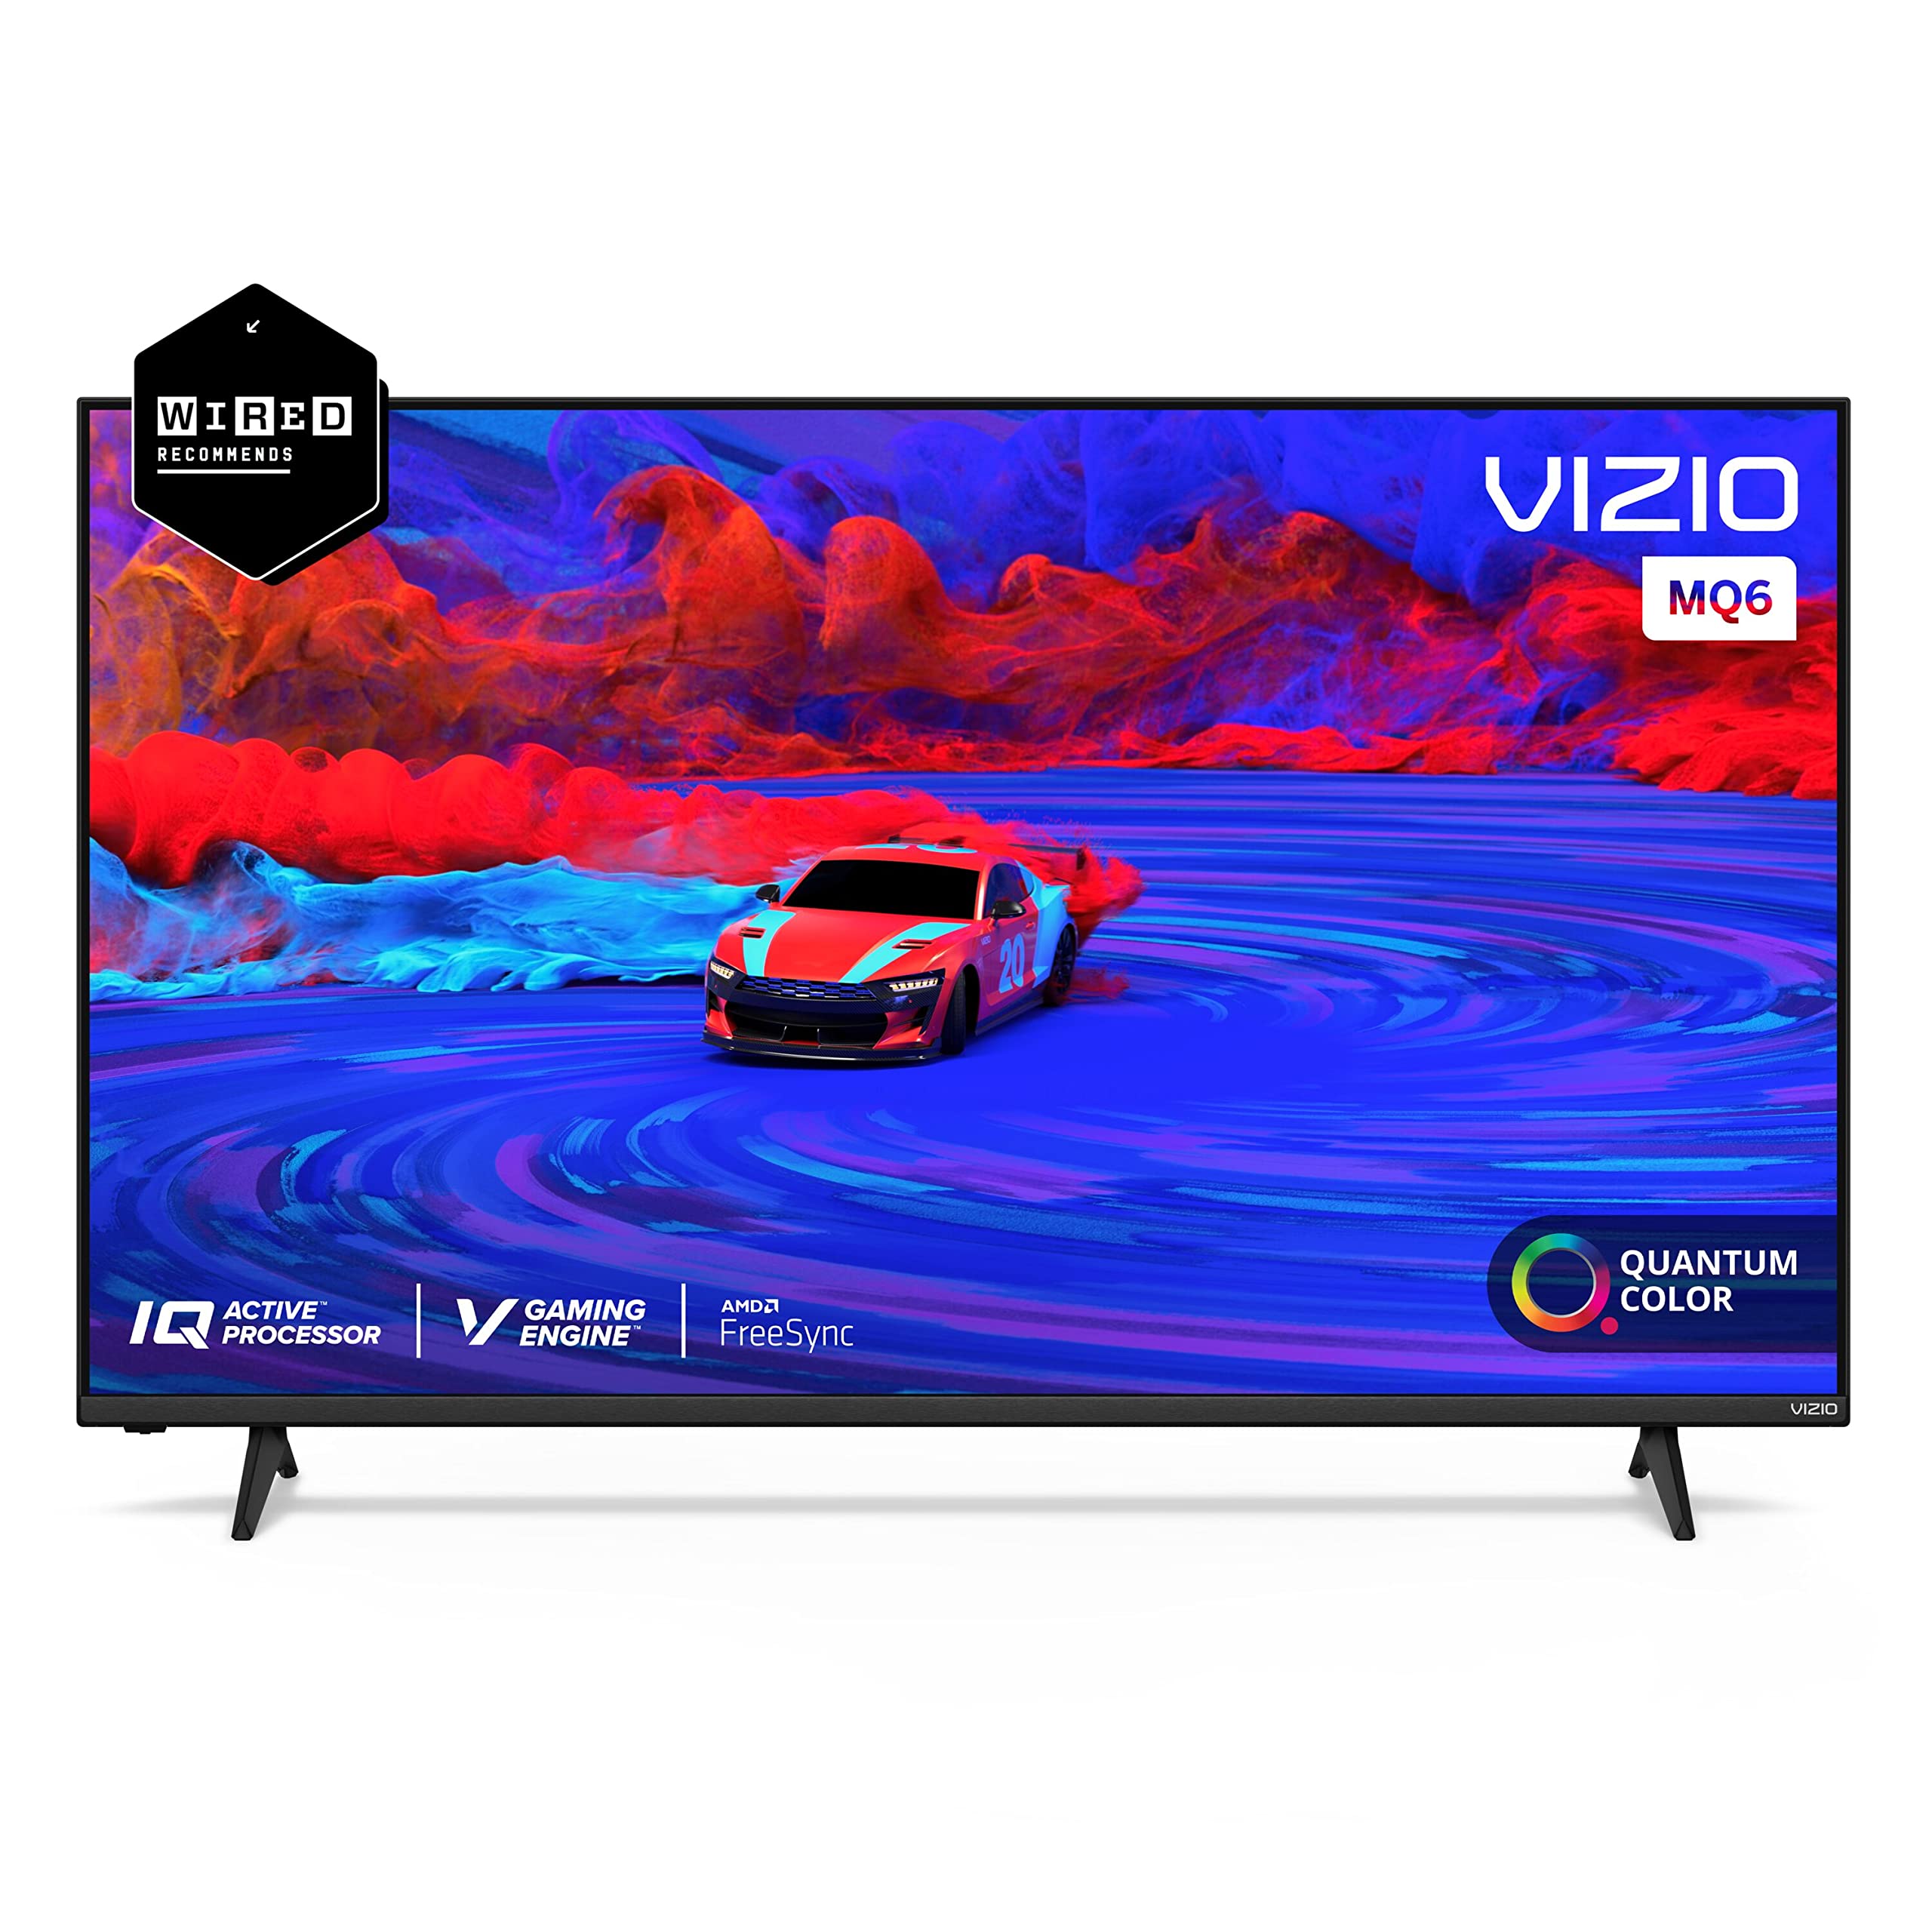 VIZIO 55-Inch M-Series 4K QLED HDR Smart TV with Voice Remote, Dolby Vision, HDR10+, Alexa Compatibility, VRR with AMD FreeSync, M55Q6-J01, 2021 Model (Renewed)